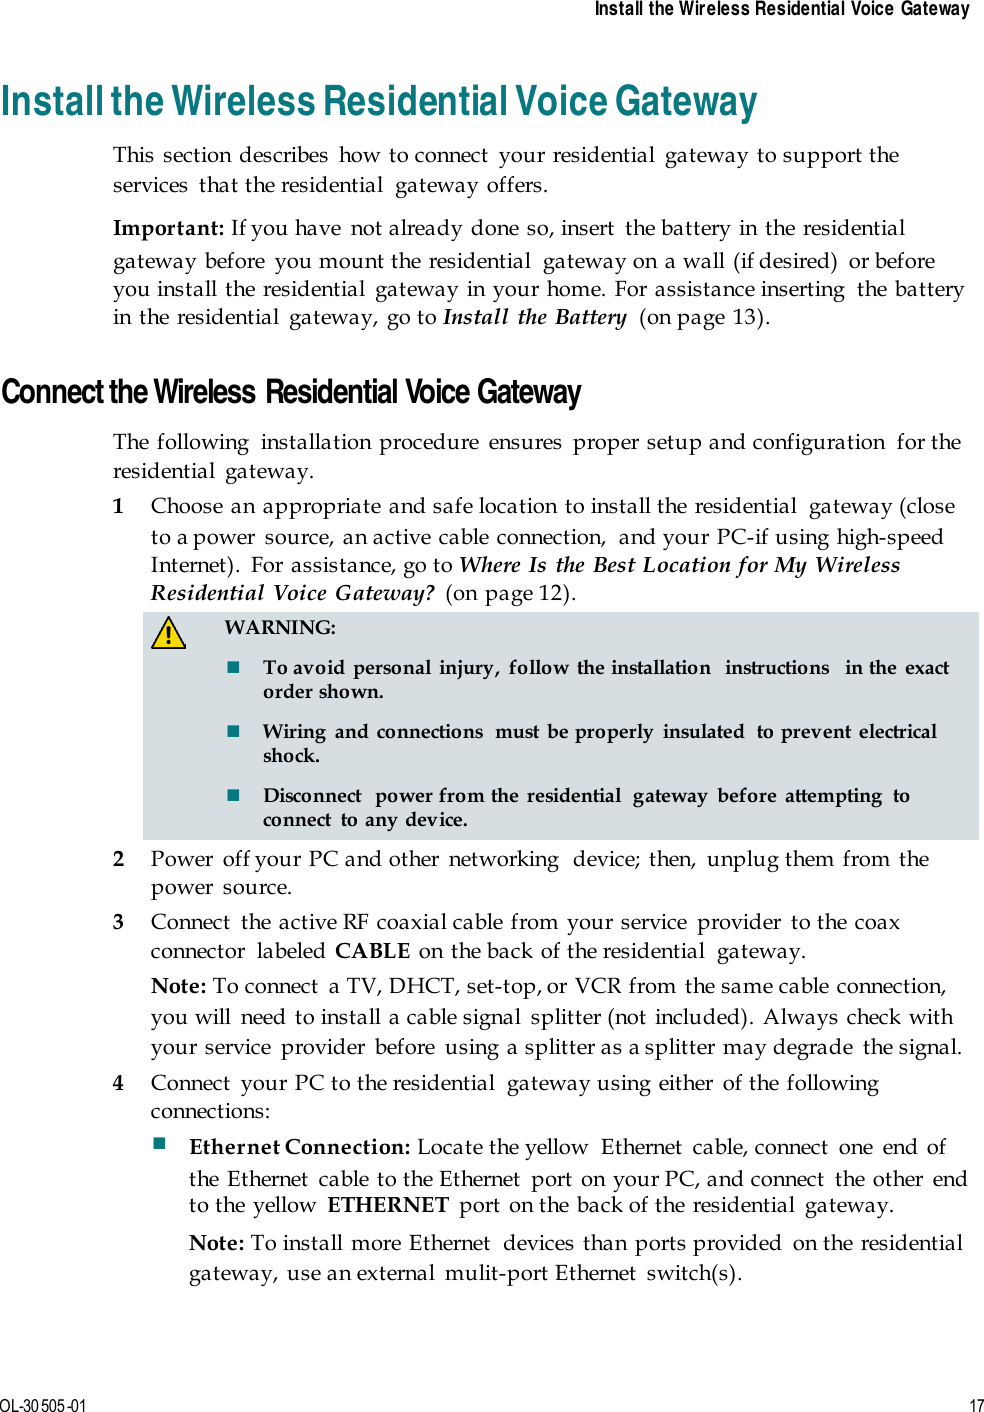    Install the Wireless Residential Voice Gateway  OL-30 505-01  17  Install the Wireless Residential Voice Gateway This section describes how to connect your residential gateway to support the services  that the residential  gateway offers.   Important: If you have  not already done so, insert the battery in the residential gateway before  you mount the residential  gateway on a wall (if desired)  or before you install the residential gateway in your home. For assistance inserting  the battery in the residential gateway, go to Install the Battery (on page 13).   Connect the Wireless Residential Voice Gateway The following  installation procedure  ensures  proper setup and configuration  for the residential gateway. 1 Choose an appropriate and safe location to install the residential  gateway (close to a power source, an active cable connection,  and your PC-if using high-speed Internet). For assistance, go to Where Is the Best Location for My Wireless Residential Voice Gateway? (on page 12).   WARNING:  To avoid personal injury, follow the installation  instructions  in the exact order shown.  Wiring and connections  must be properly insulated  to prevent  electrical shock.  Disconnect  power from the residential  gateway before attempting to connect  to any device. 2 Power off your PC and other networking  device; then, unplug them from the power source. 3 Connect the active RF coaxial cable from your service provider to the coax connector labeled CABLE  on the back of the residential  gateway. Note: To connect  a TV, DHCT, set-top, or VCR from the same cable connection, you will  need to install a cable signal  splitter (not included). Always check with your service  provider  before  using a splitter as a splitter may degrade  the signal. 4 Connect  your PC to the residential  gateway using either  of the following connections:  Ethernet Connection: Locate the yellow  Ethernet  cable, connect  one  end of the Ethernet  cable to the Ethernet  port on your PC, and connect  the other  end to the yellow  ETHERNET port on the back of the residential  gateway. Note: To install more Ethernet  devices than ports provided on the residential gateway, use an external  mulit-port Ethernet  switch(s). 